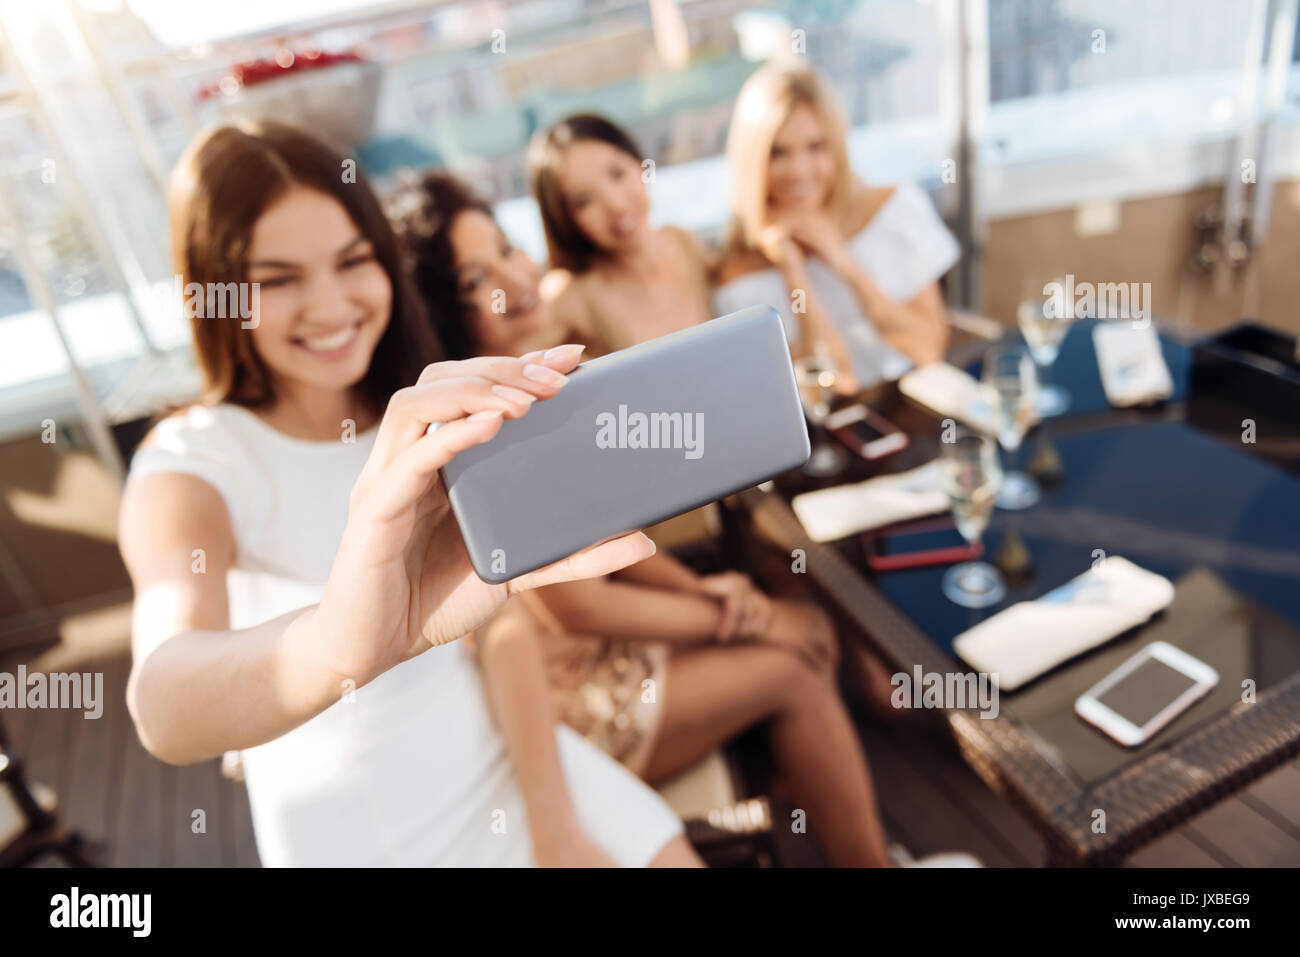 Modern smartphone being used for taking photos Stock Photo